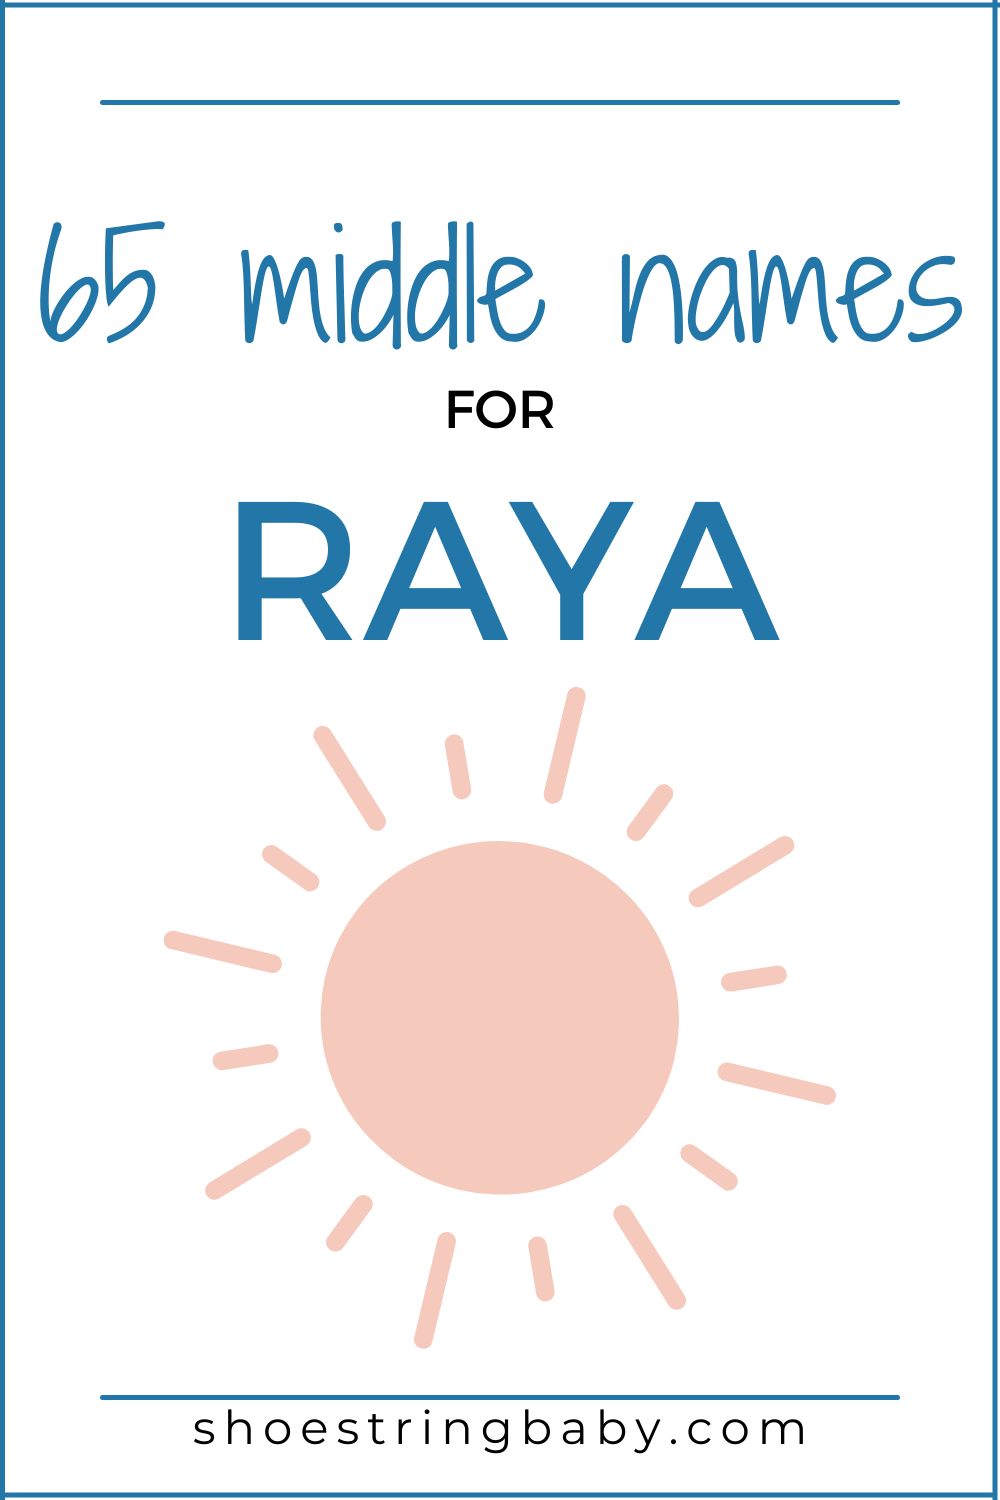 65 Middle Names That Go With Raya (With Meanings!)